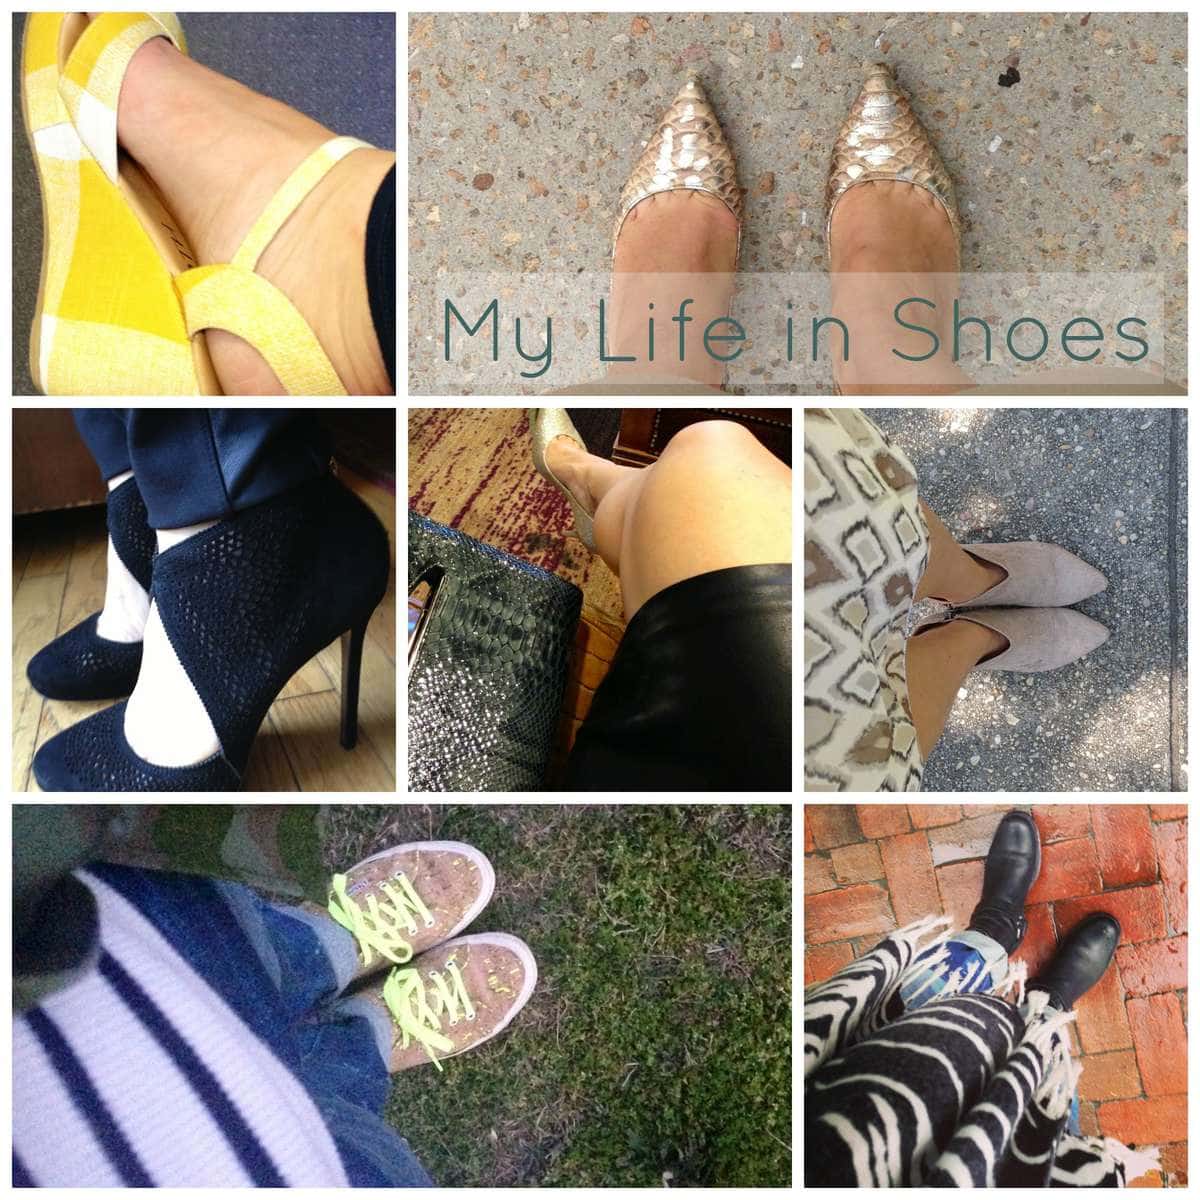 My Life in Shoes